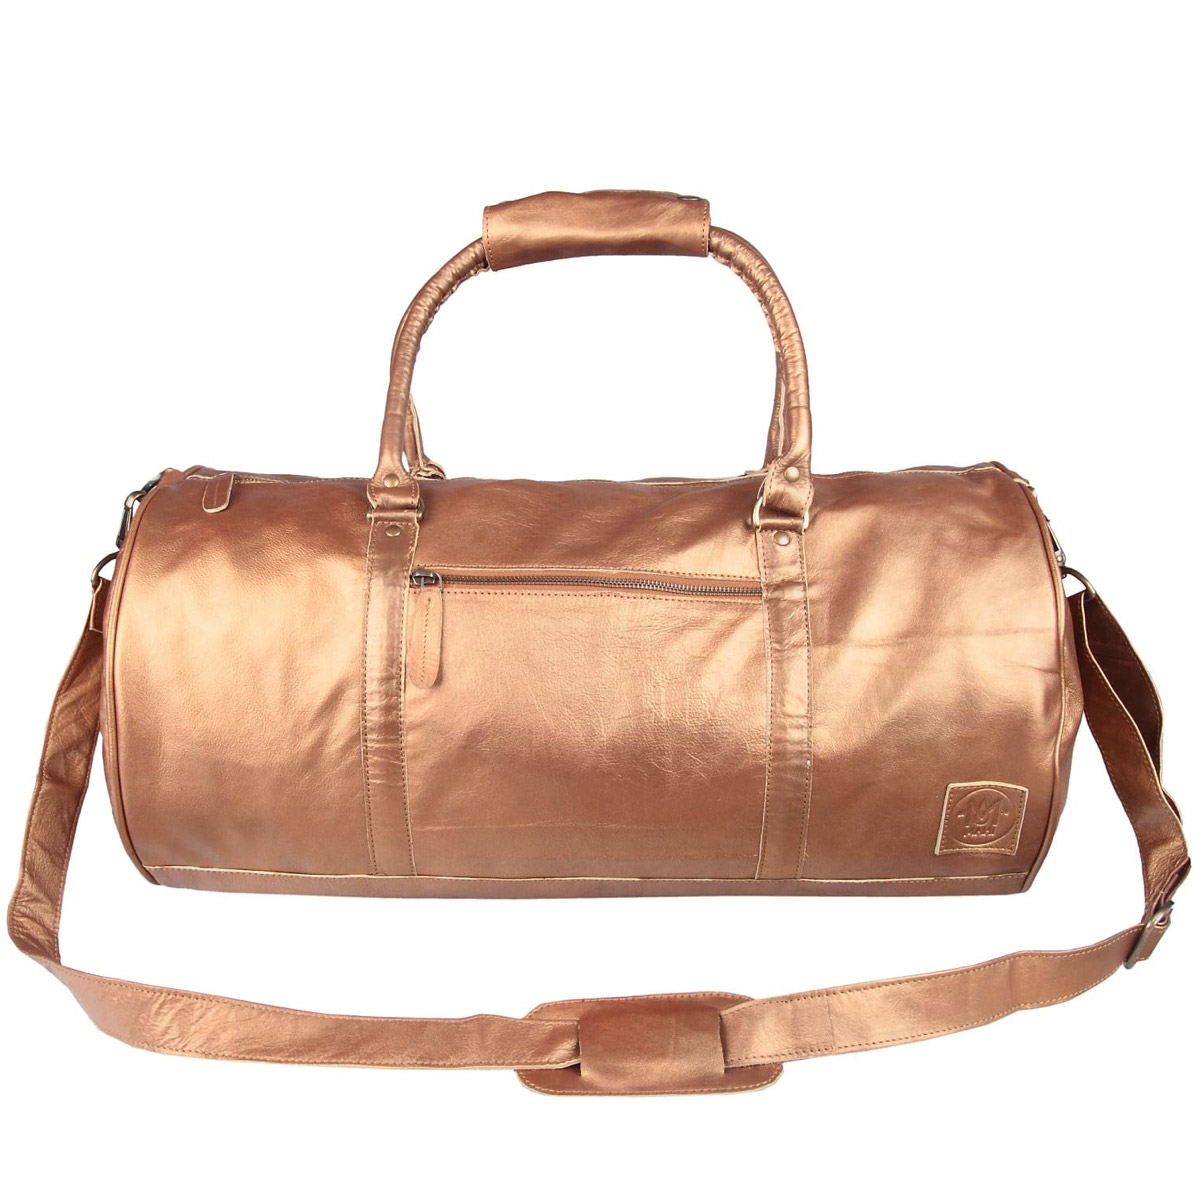 Overnighter / Gym bag in Bronze Leather